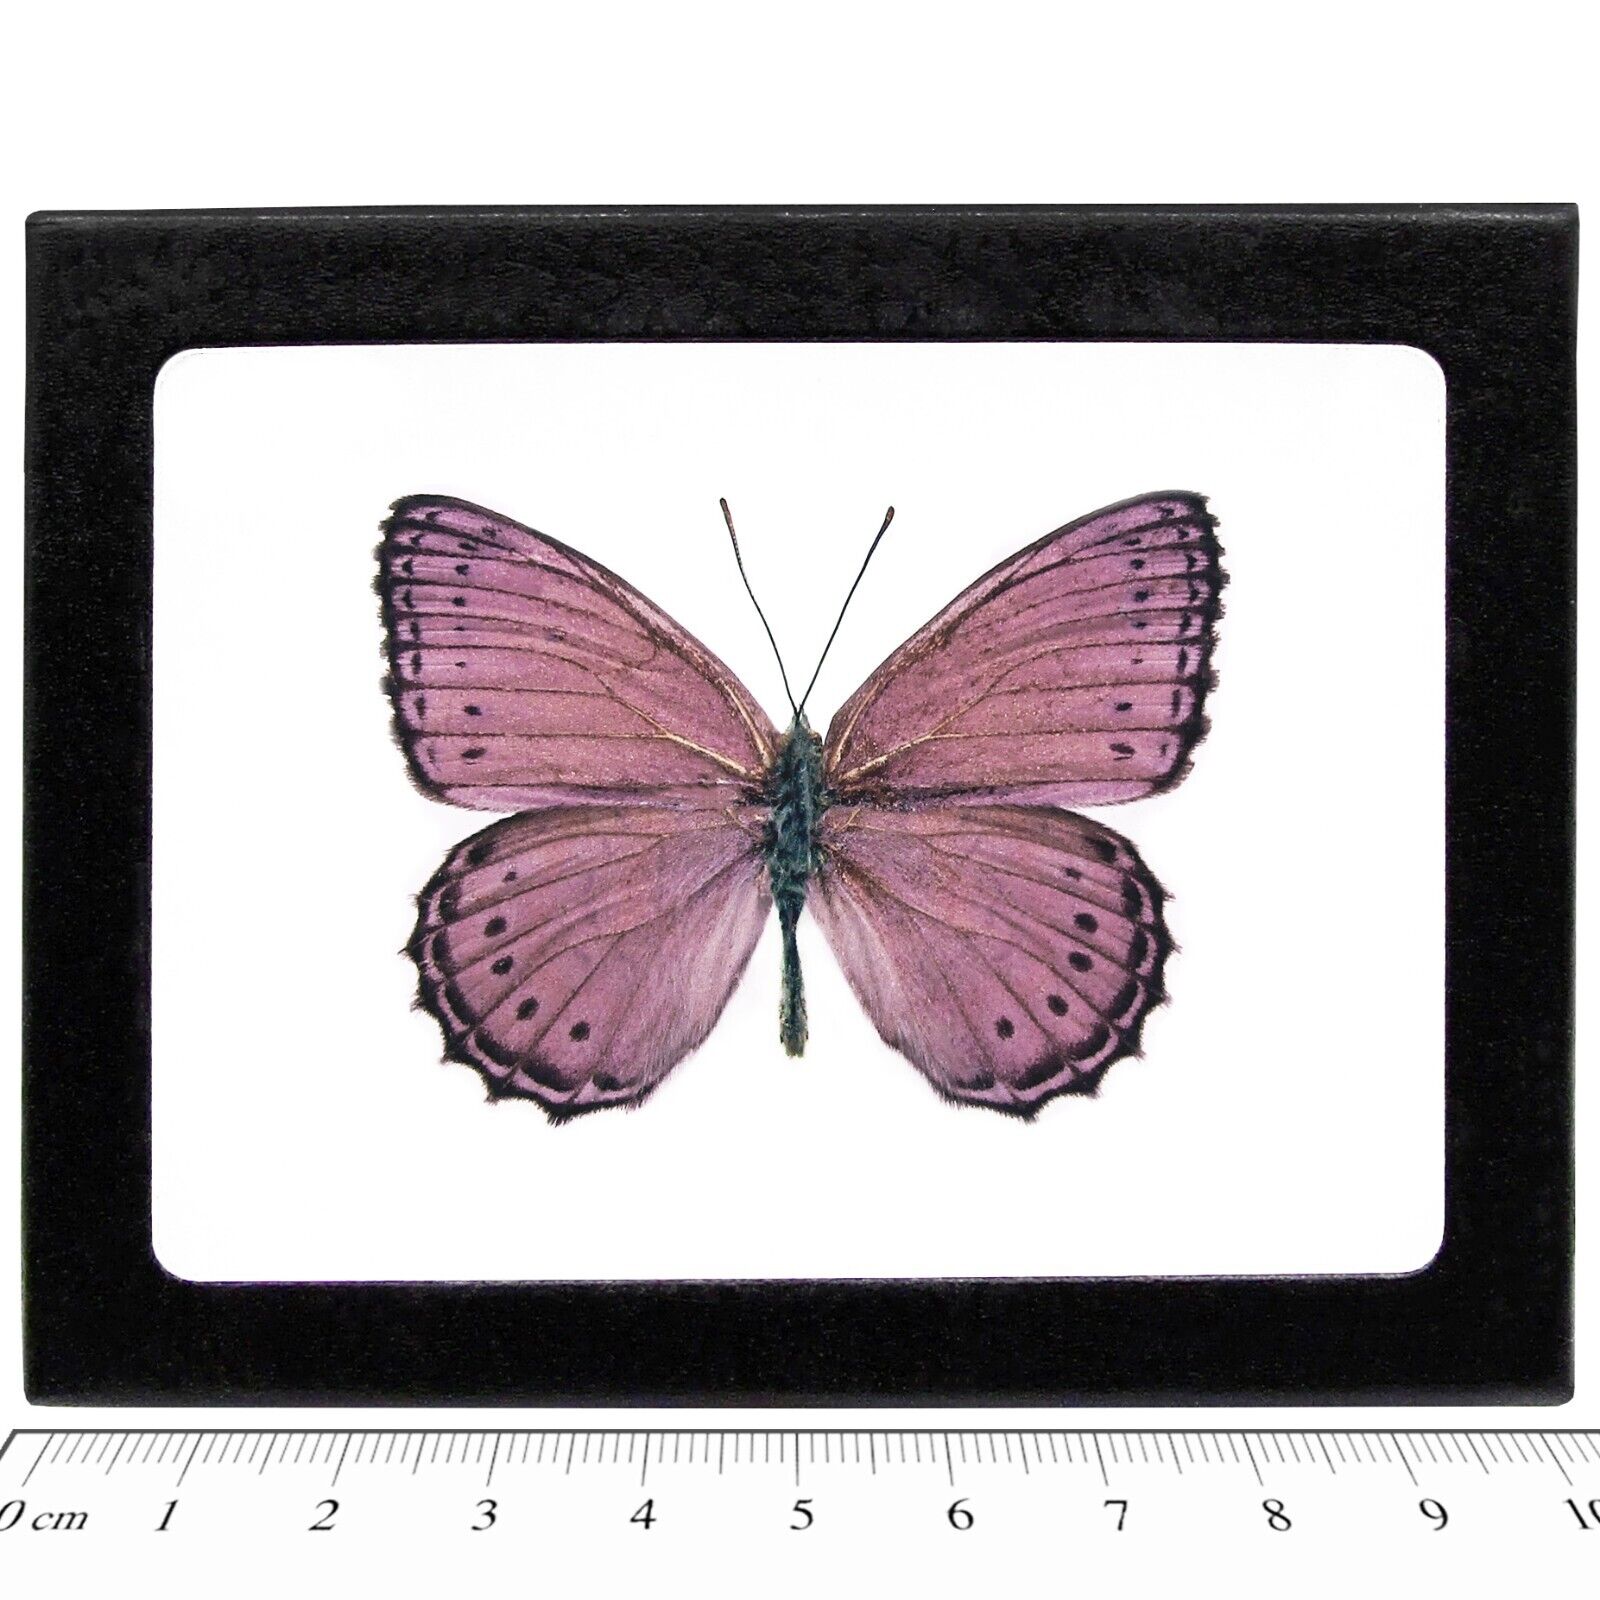 Crenis pechueli REAL FRAMED BUTTERFLY PINK PURPLE AFRICA